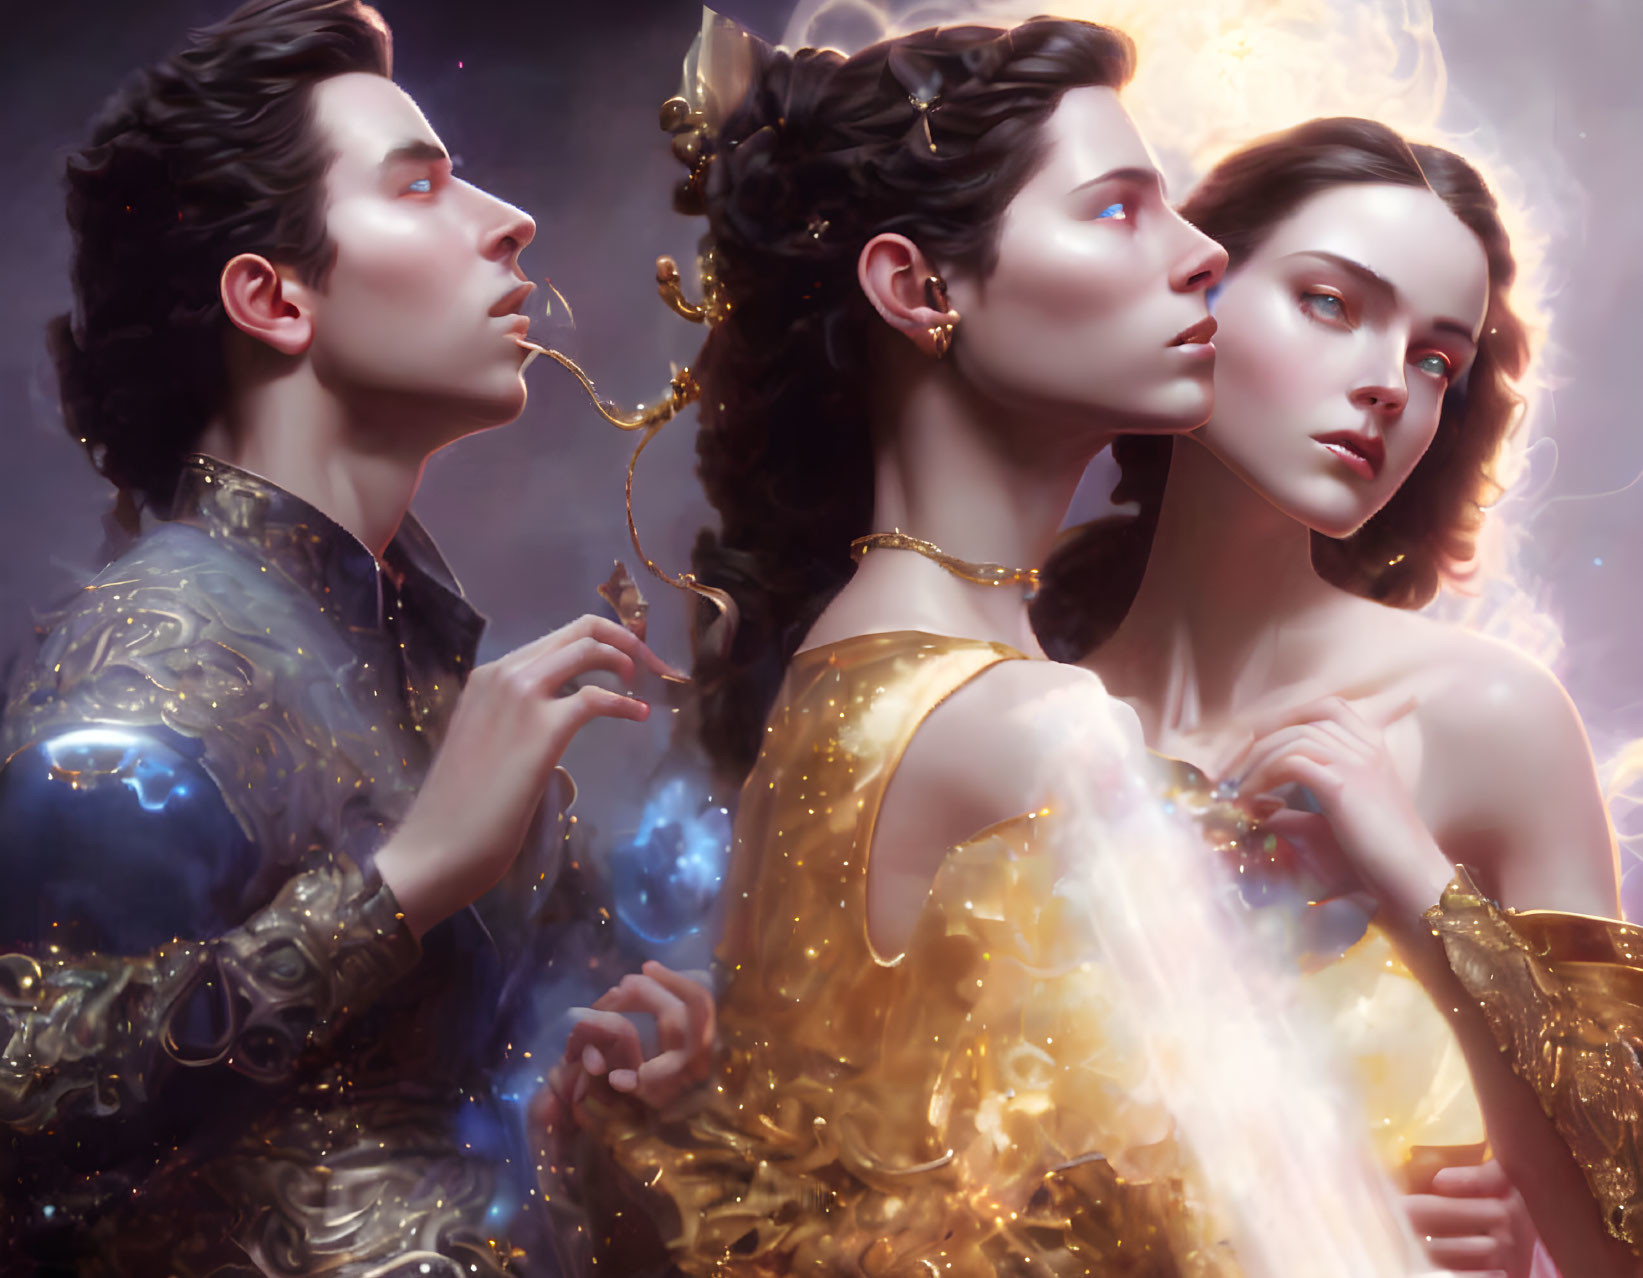 Ethereal figures in celestial attire with dreamy haze - fantasy theme